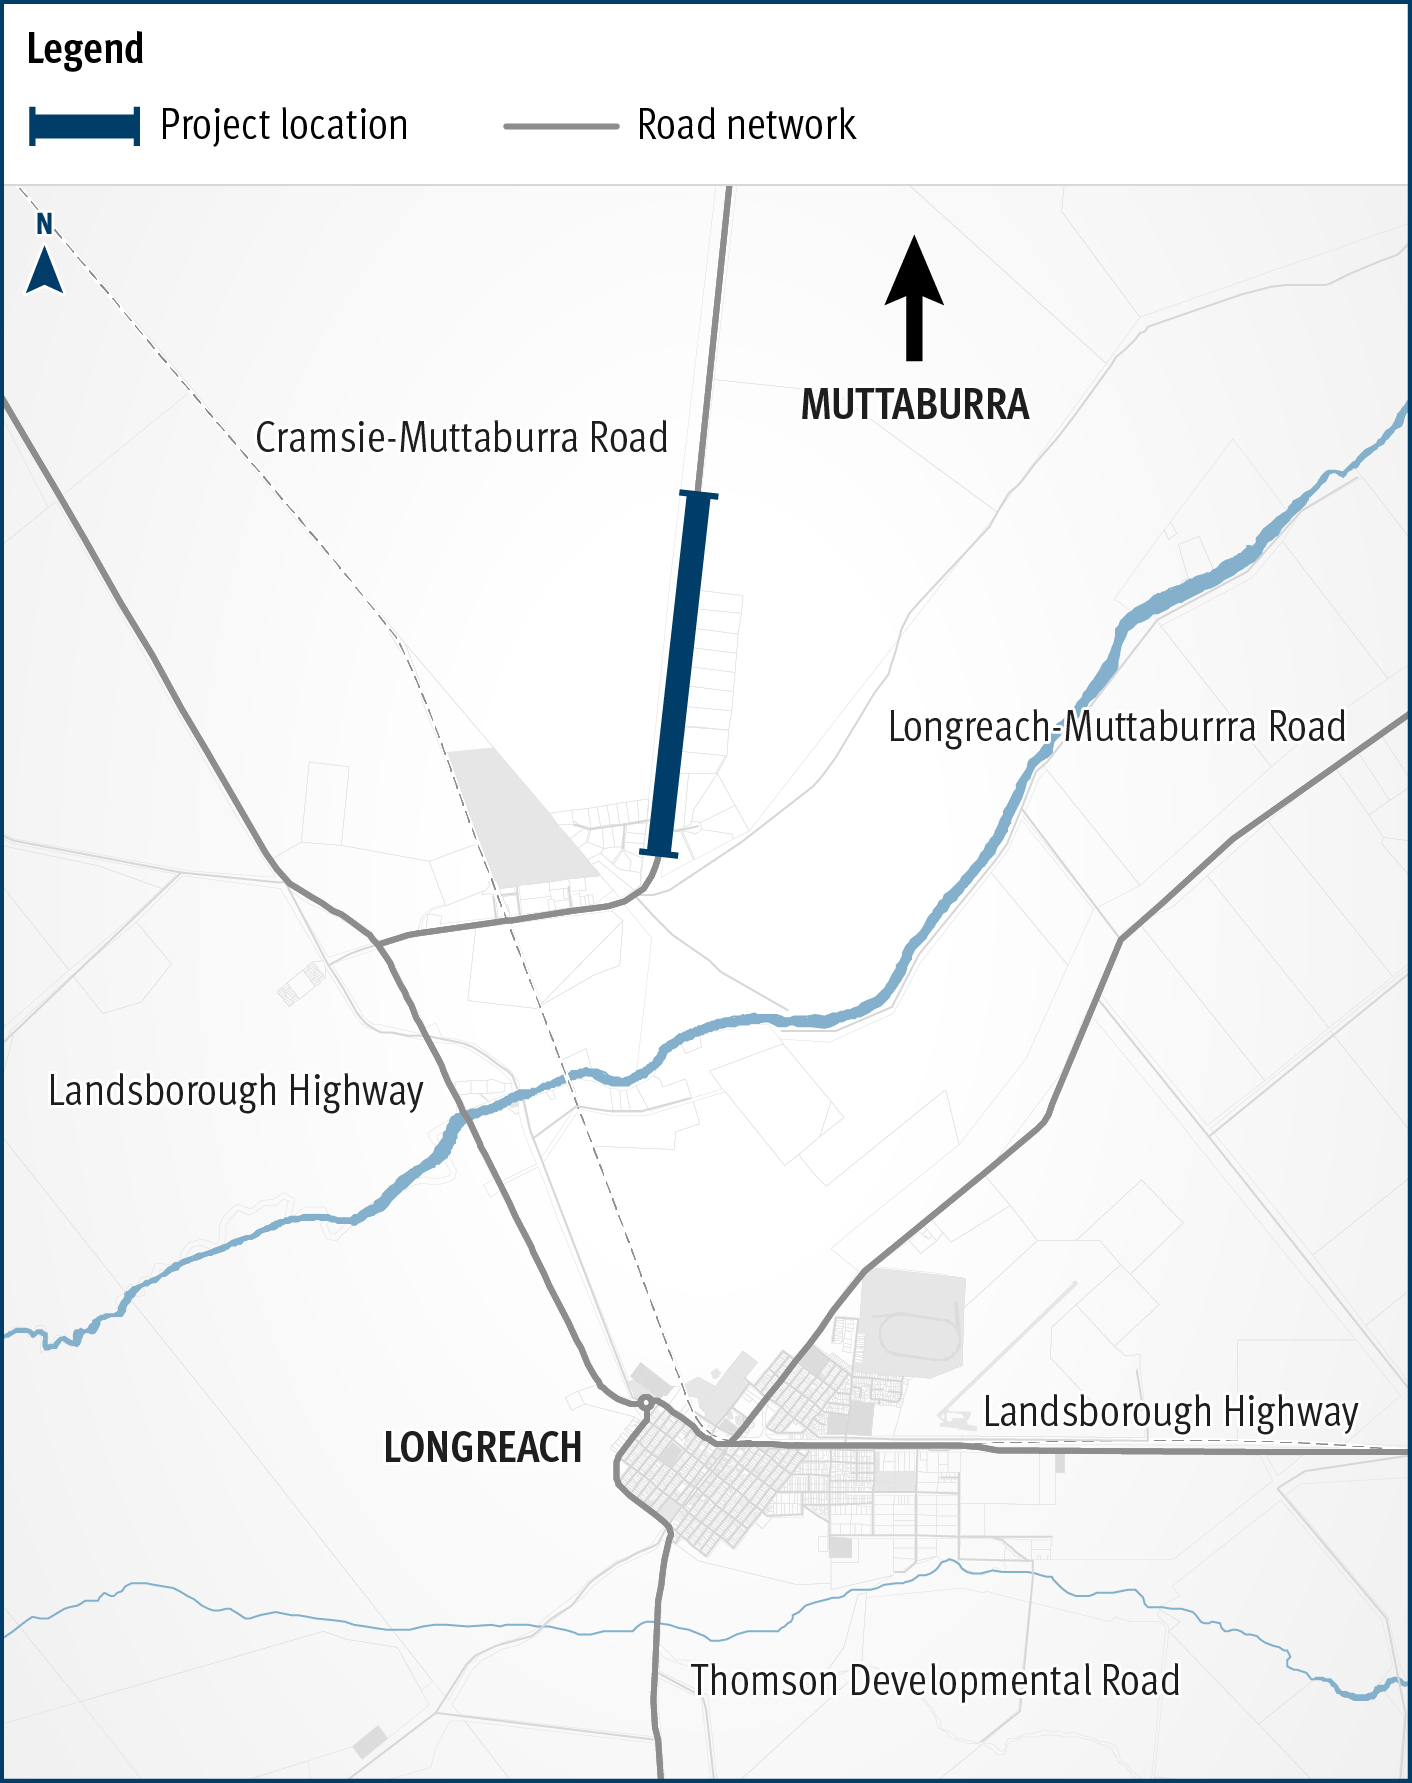 The map shows the location of rehabilitation and widening works underway on a three kilometre section of the Cramsie-Muttaburra Road. The road is situated between Longreach and Muttaburra in Central West Queensland. The map shows the proximity of the works to the Longreach township and includes the surrounding road network, such as the Landsborough Highway and local government-owned Longreach-Muttaburra Road.